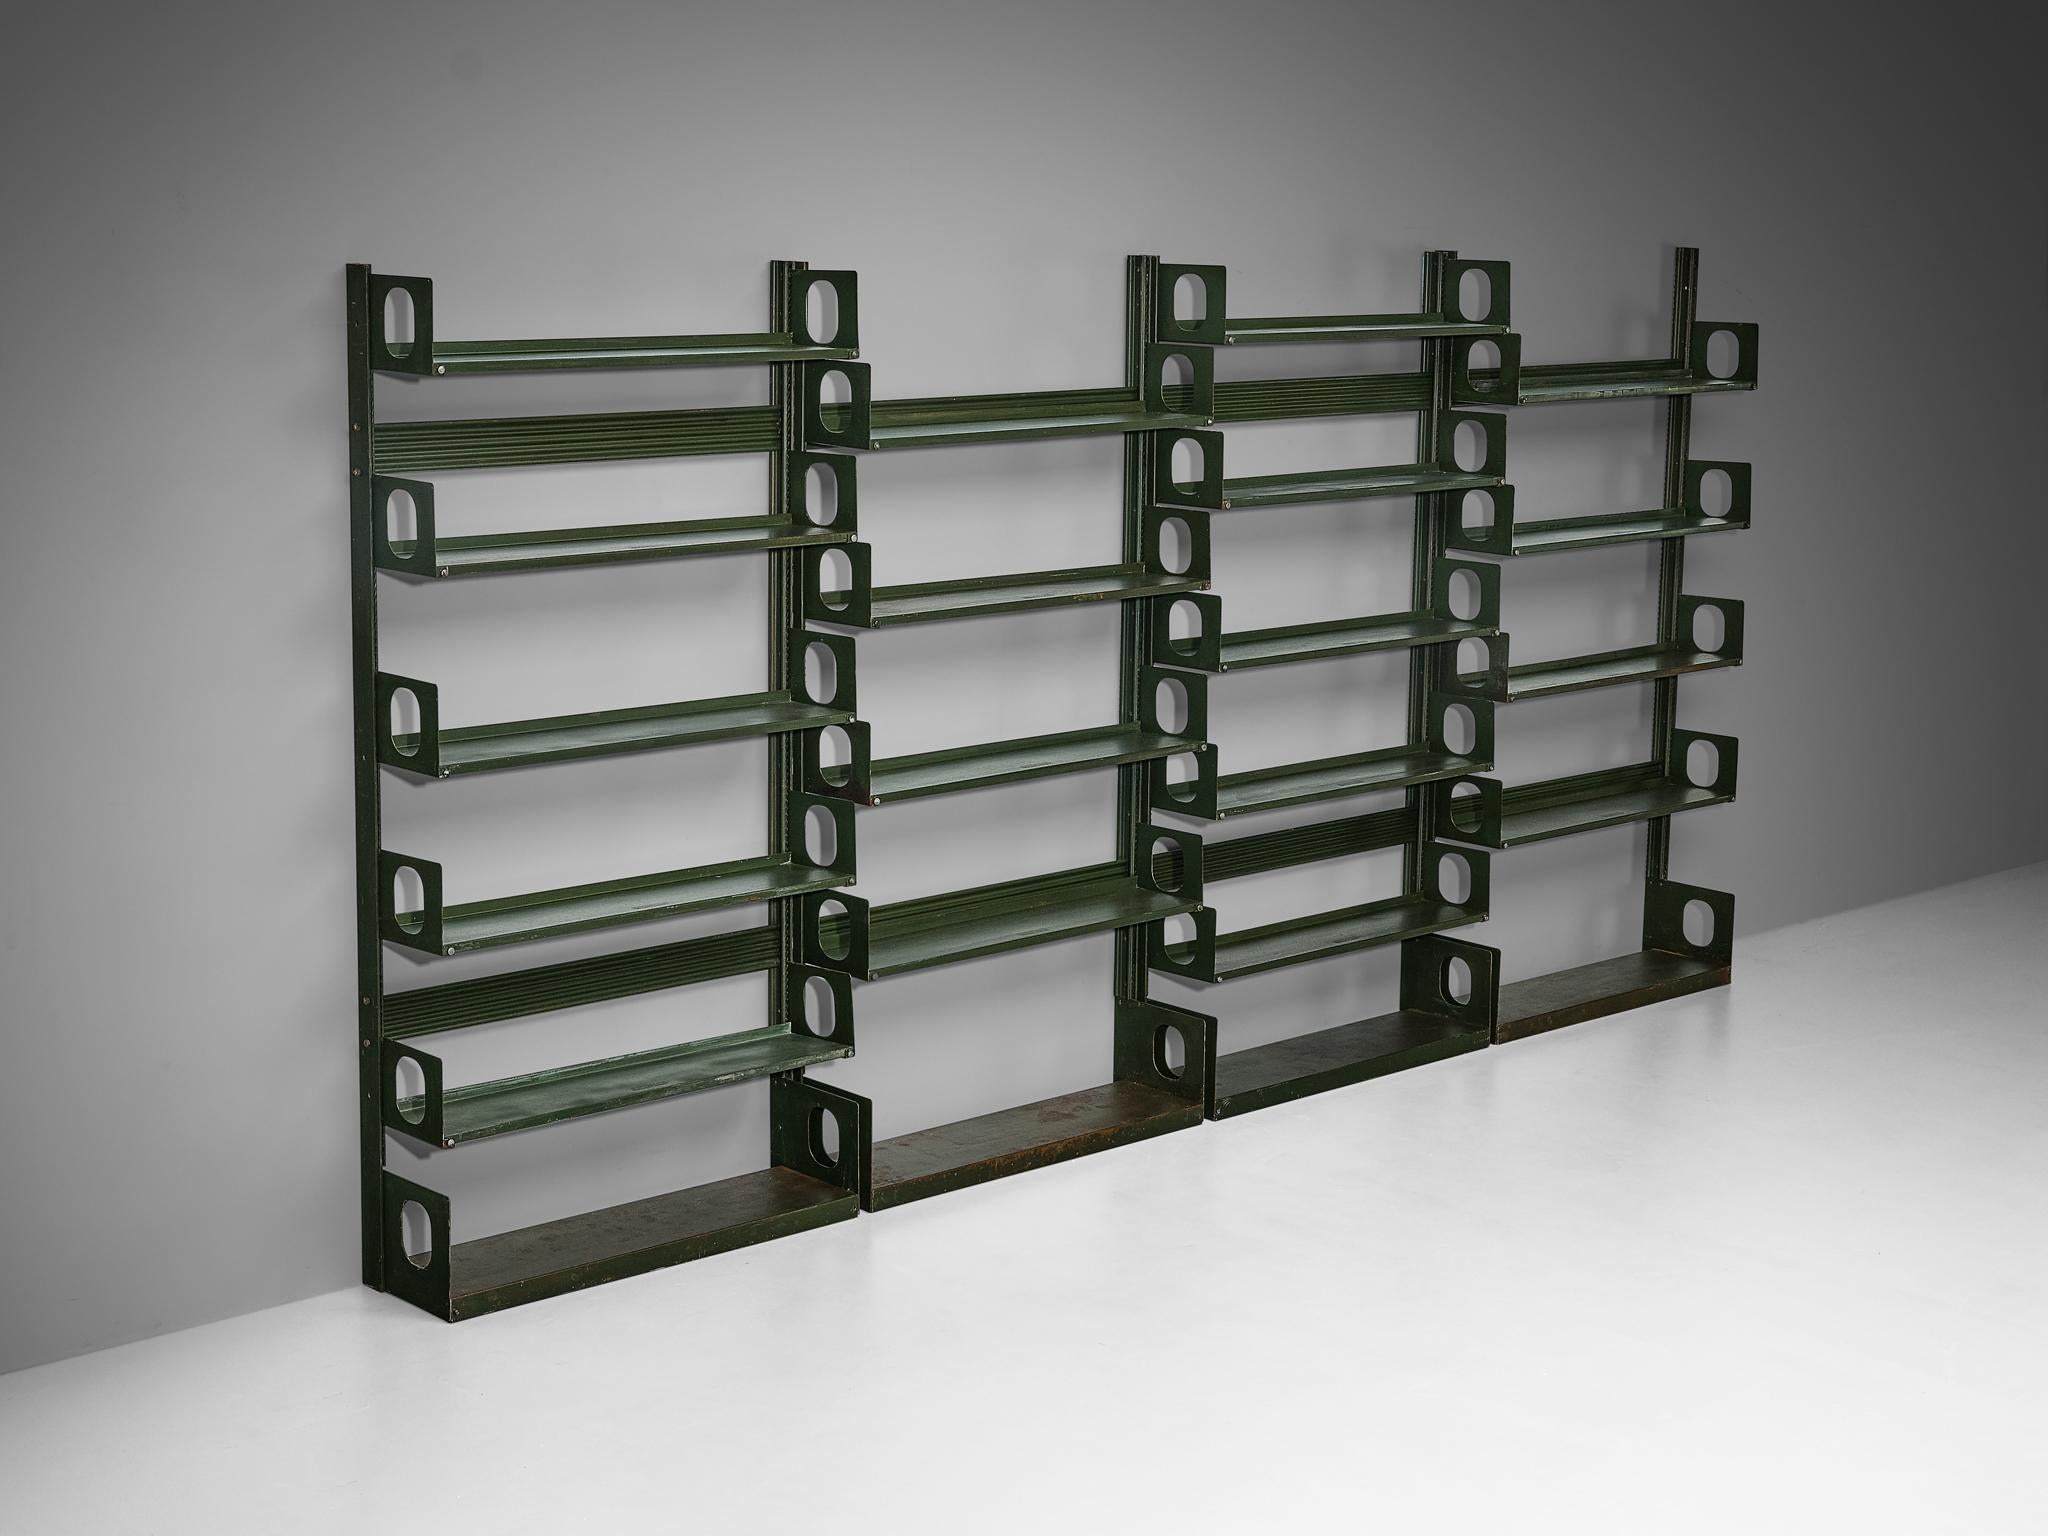 Mid-20th Century Lips Vago 'Triennal' Bookcases or Shelving System  For Sale